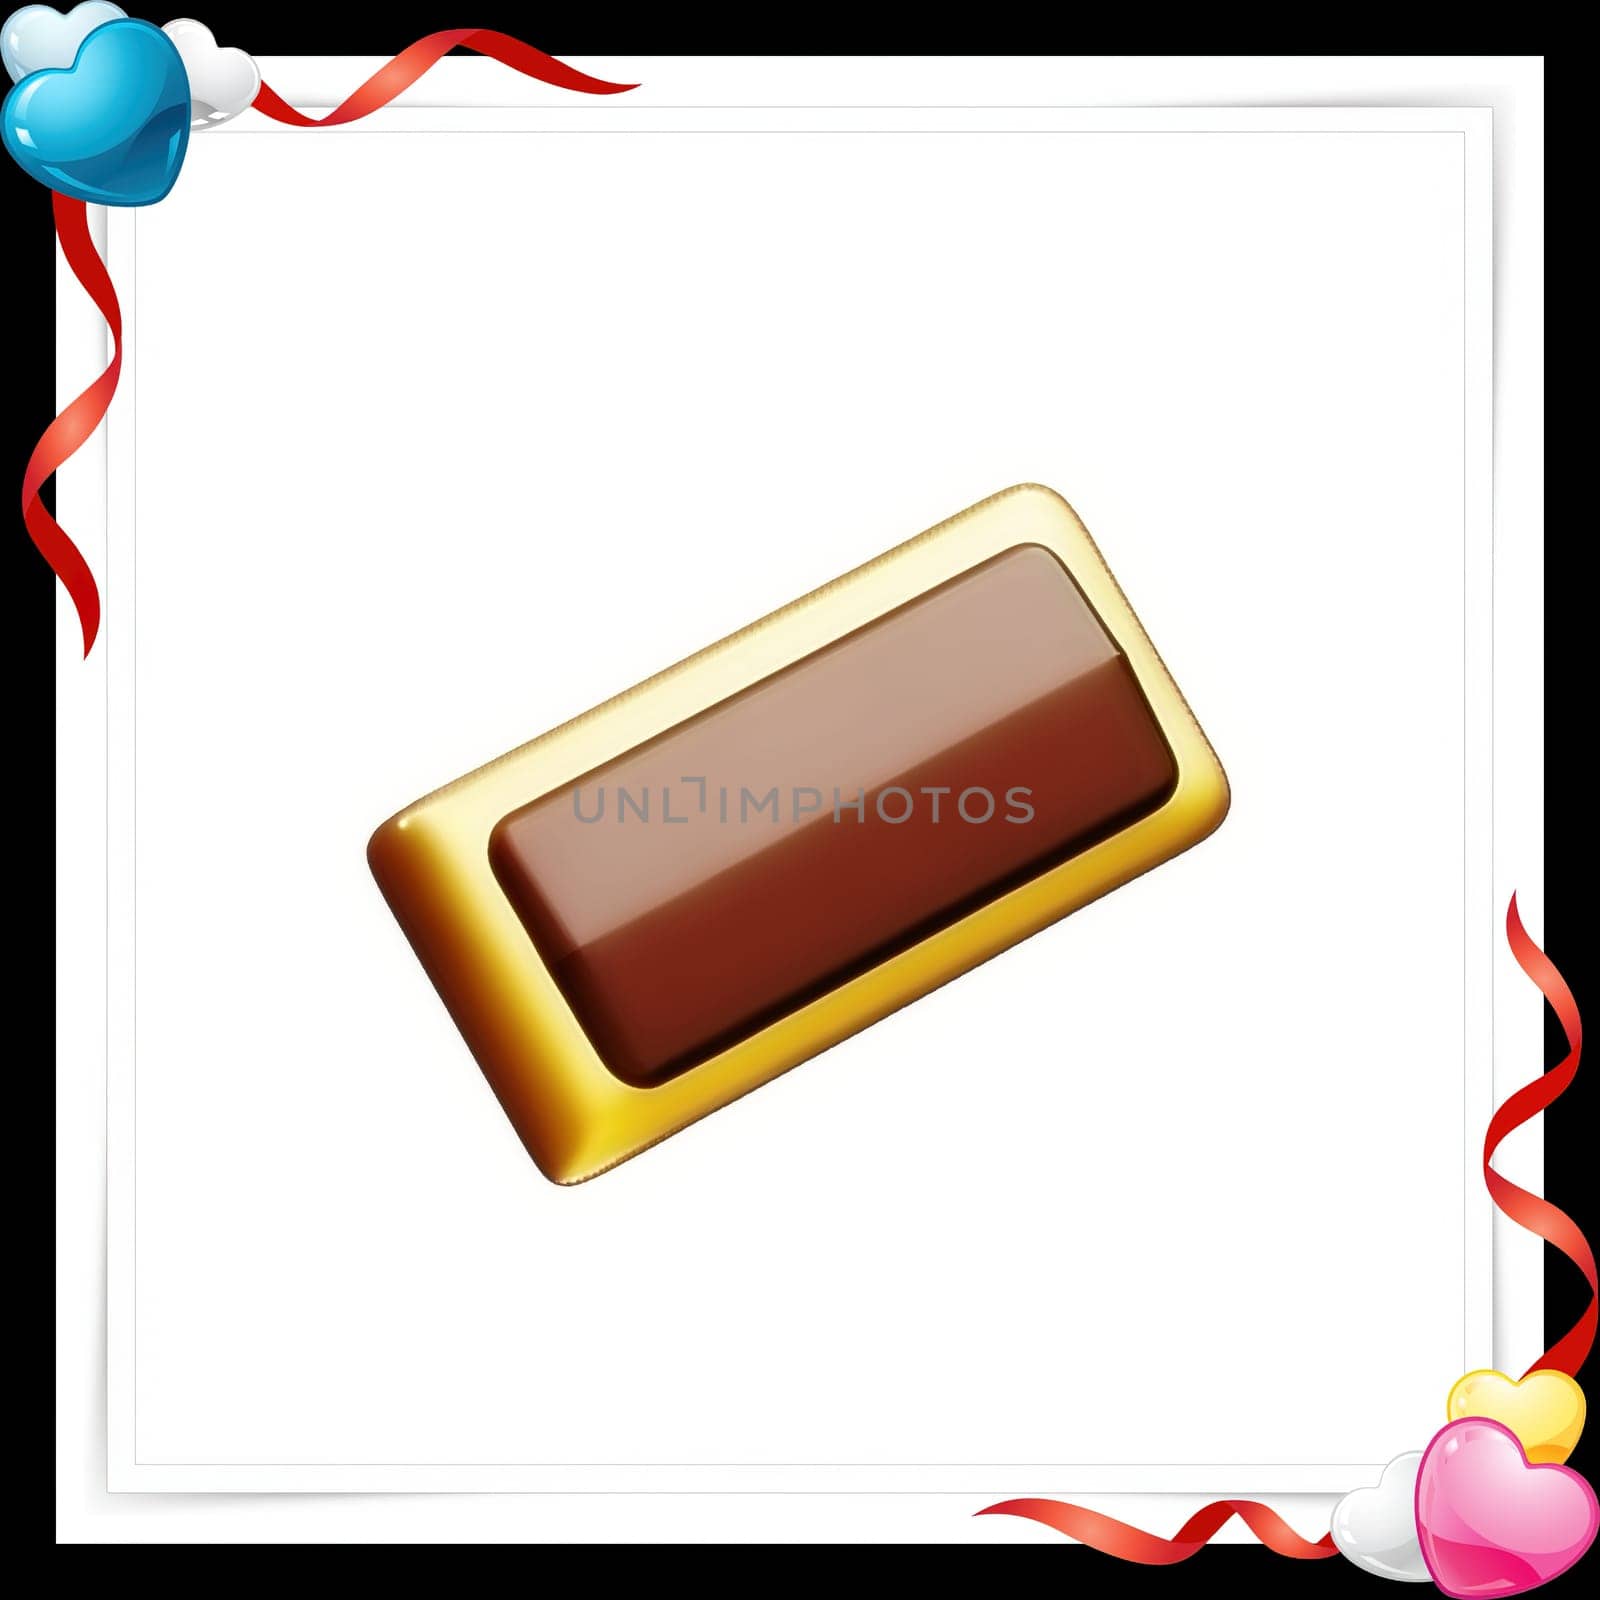 Illustration of chocolate bar on a white background with a red ribbon with colorful hearts